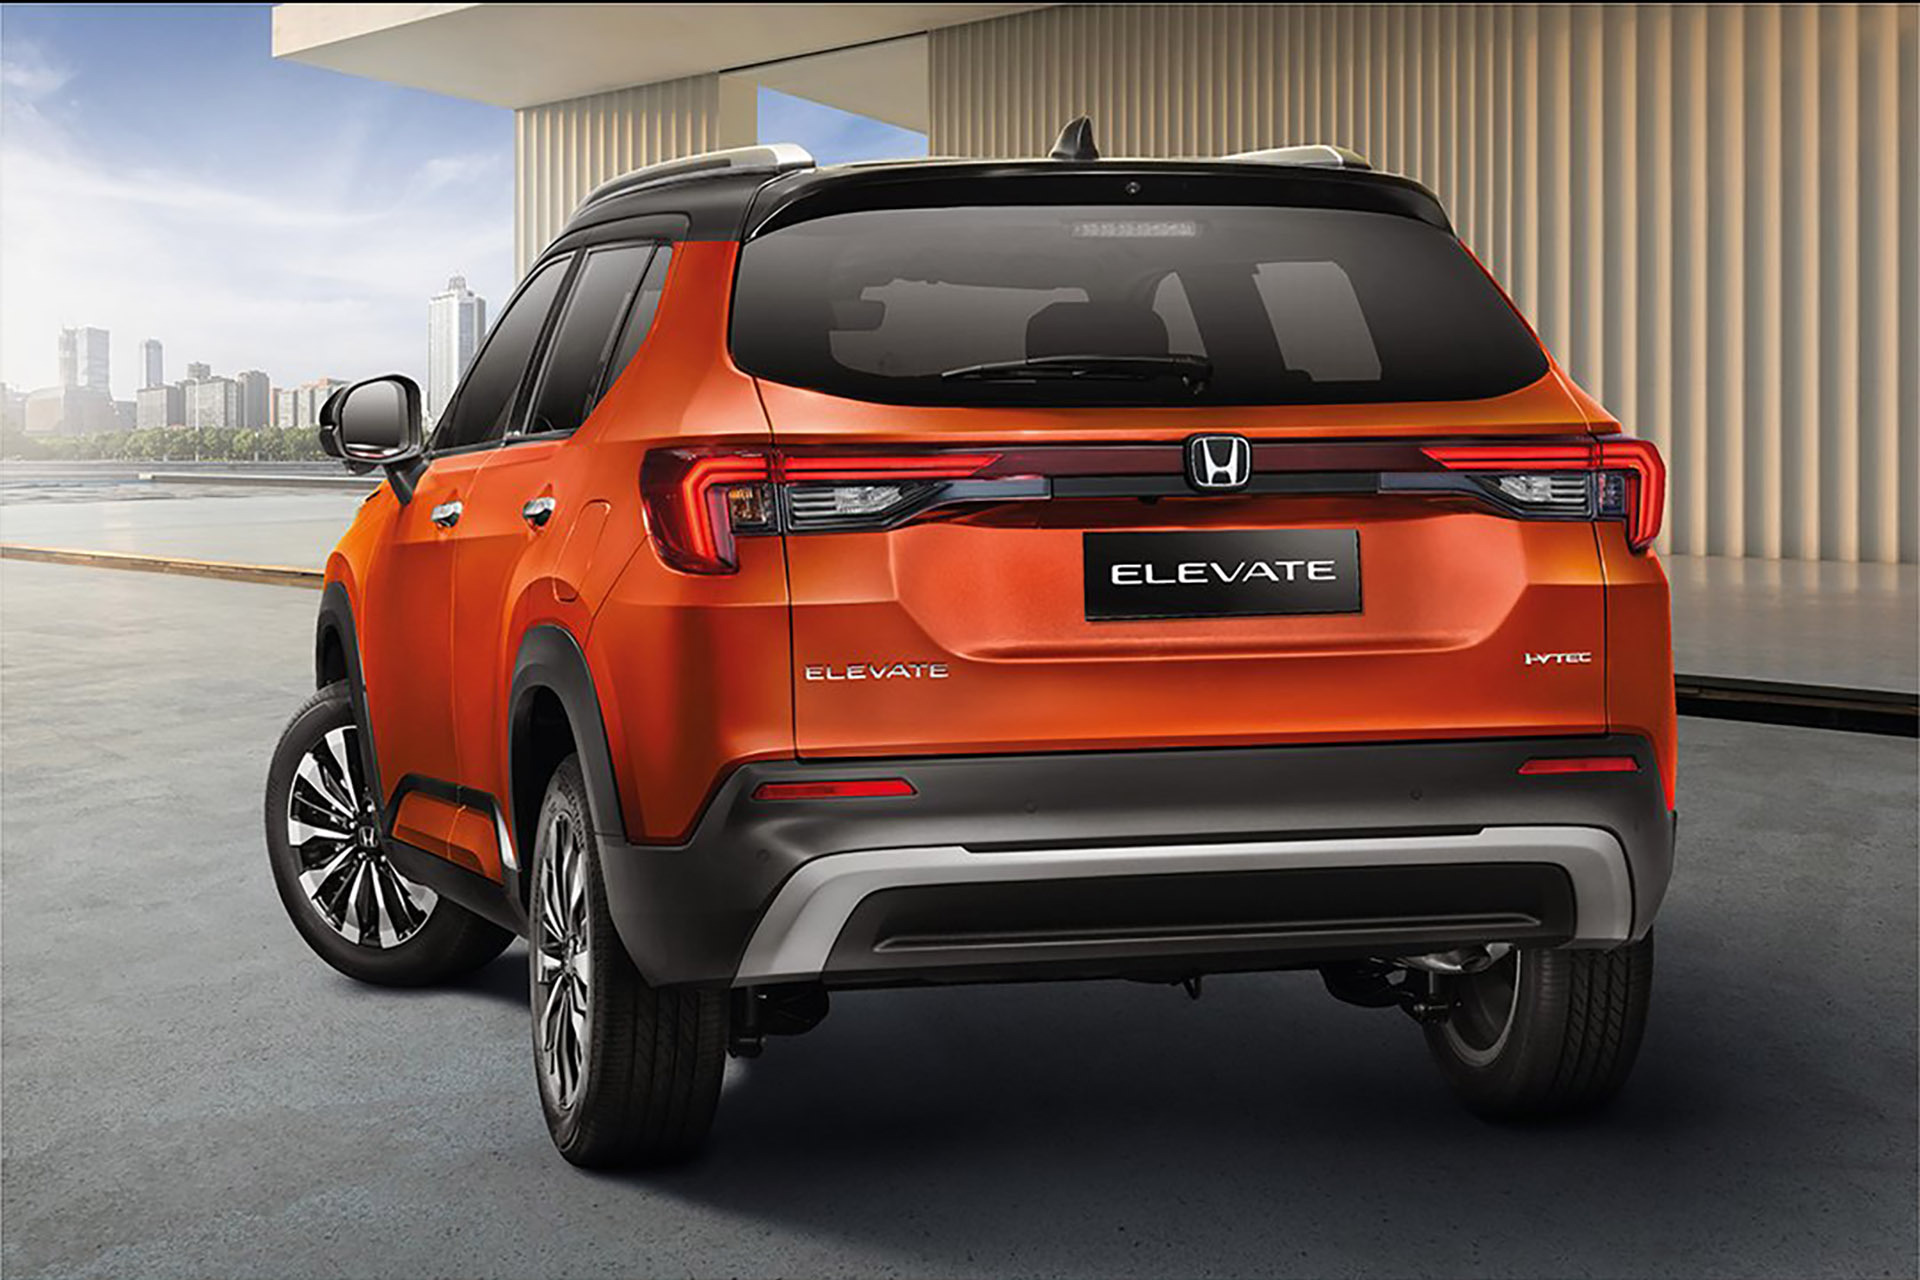 Honda's New Elevate Revealed As An India-Built SUV For Global Markets